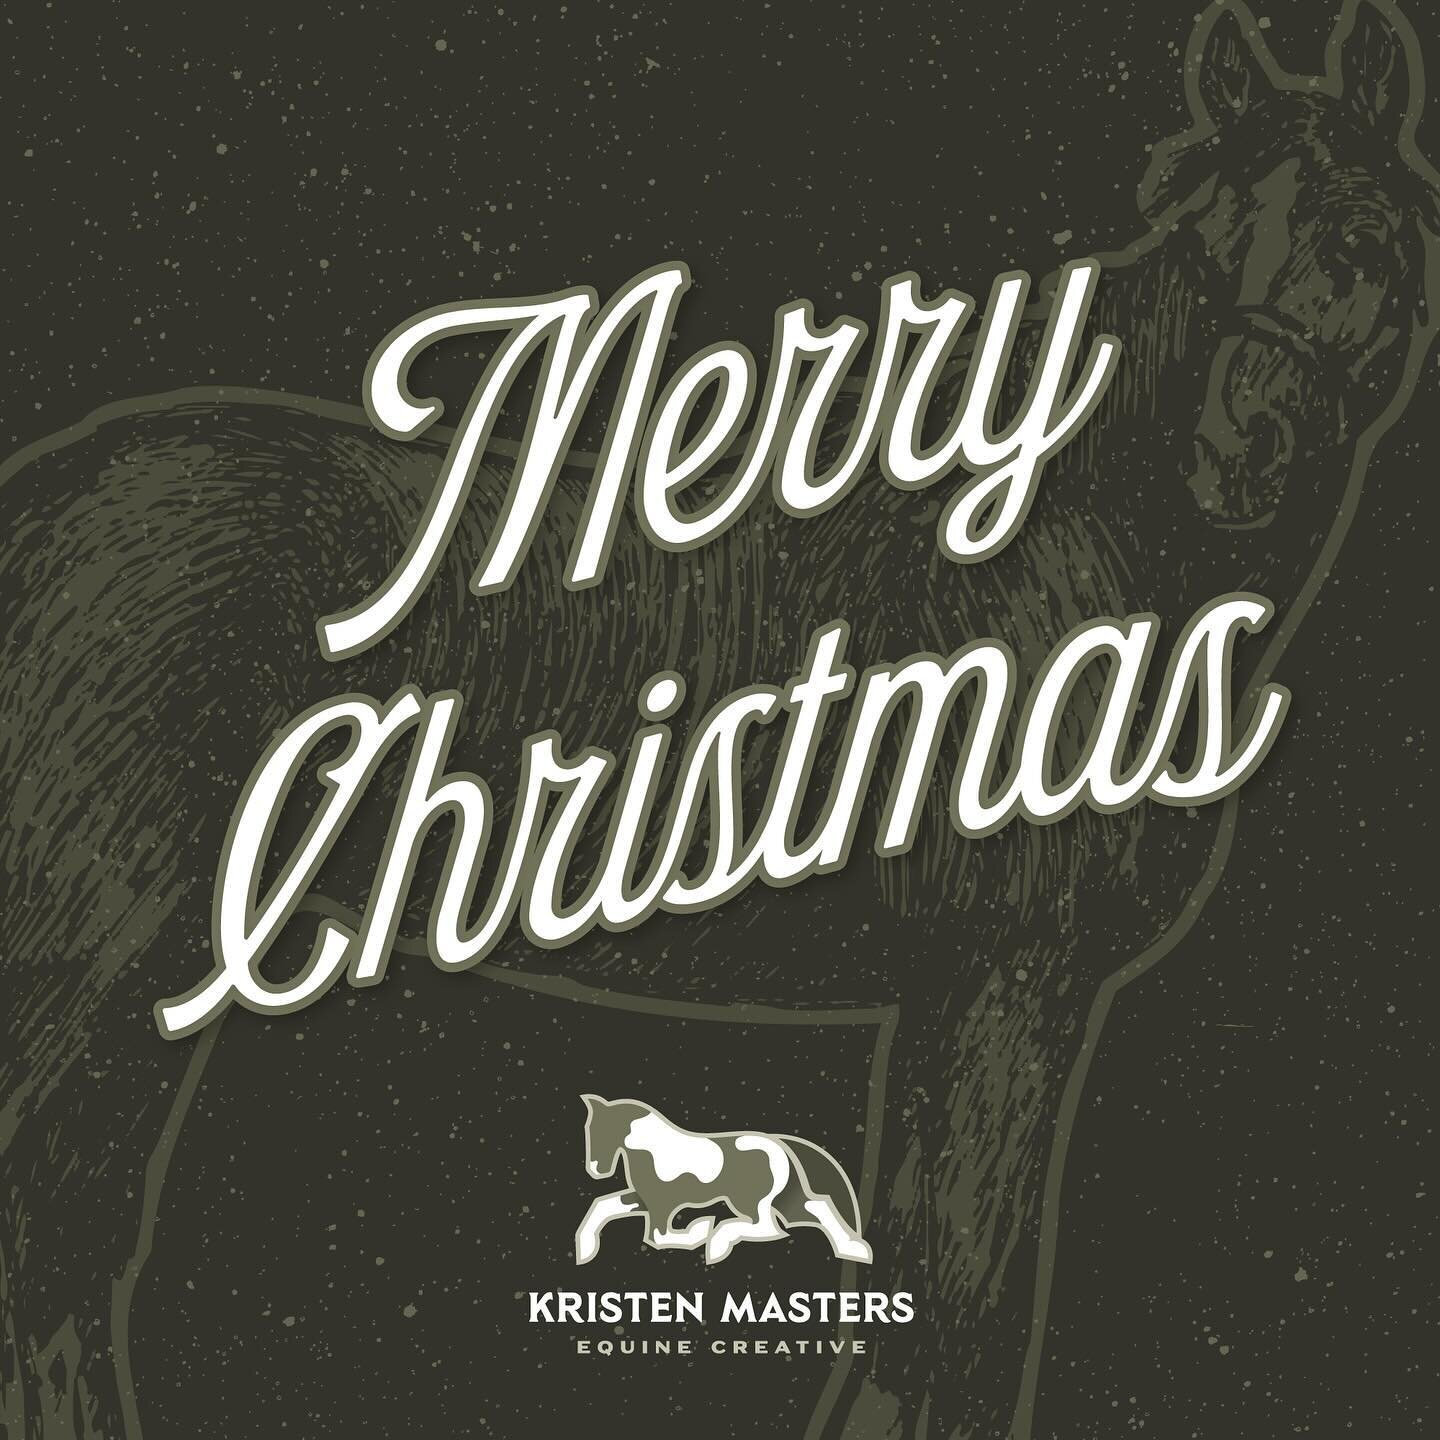 From our family to yours, we wish you the merriest of Christmases and the brightest of holidays! May today be filled with cheer, love, the creation of new memories, and reflection on old ones.

🎄❤️ 🐴 ✨

#equine #equinebusiness #equinebranding #hors